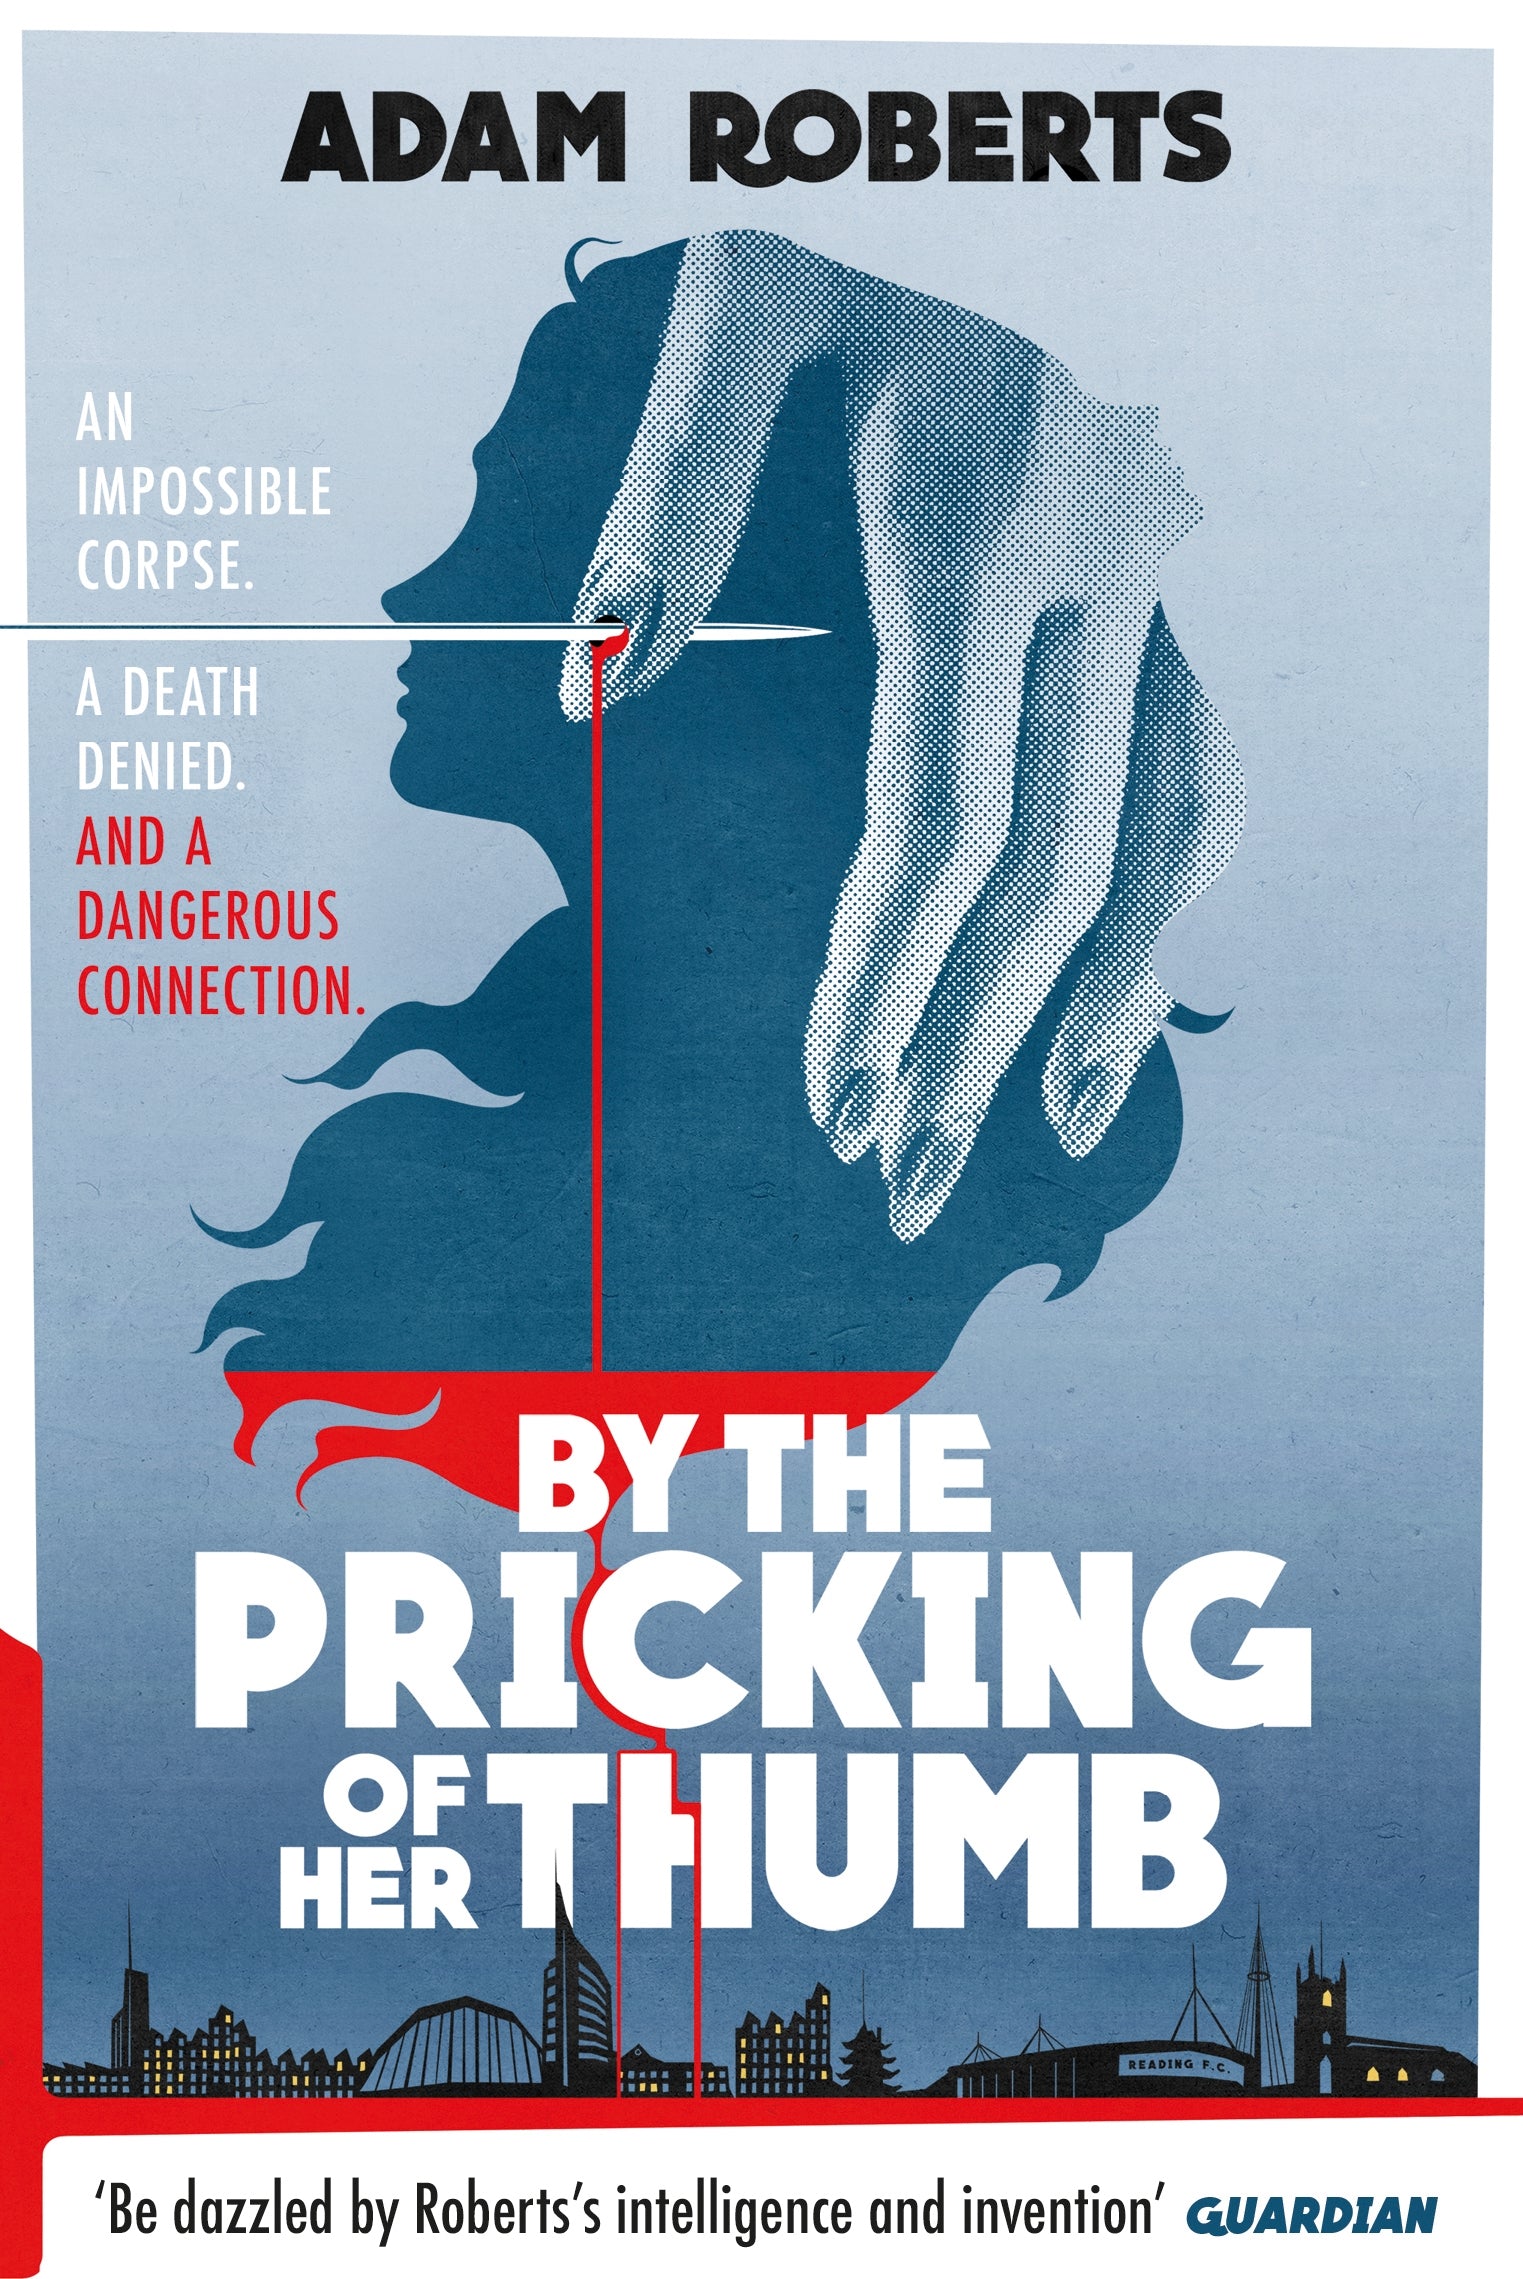 By the Pricking of Her Thumb by Adam Roberts